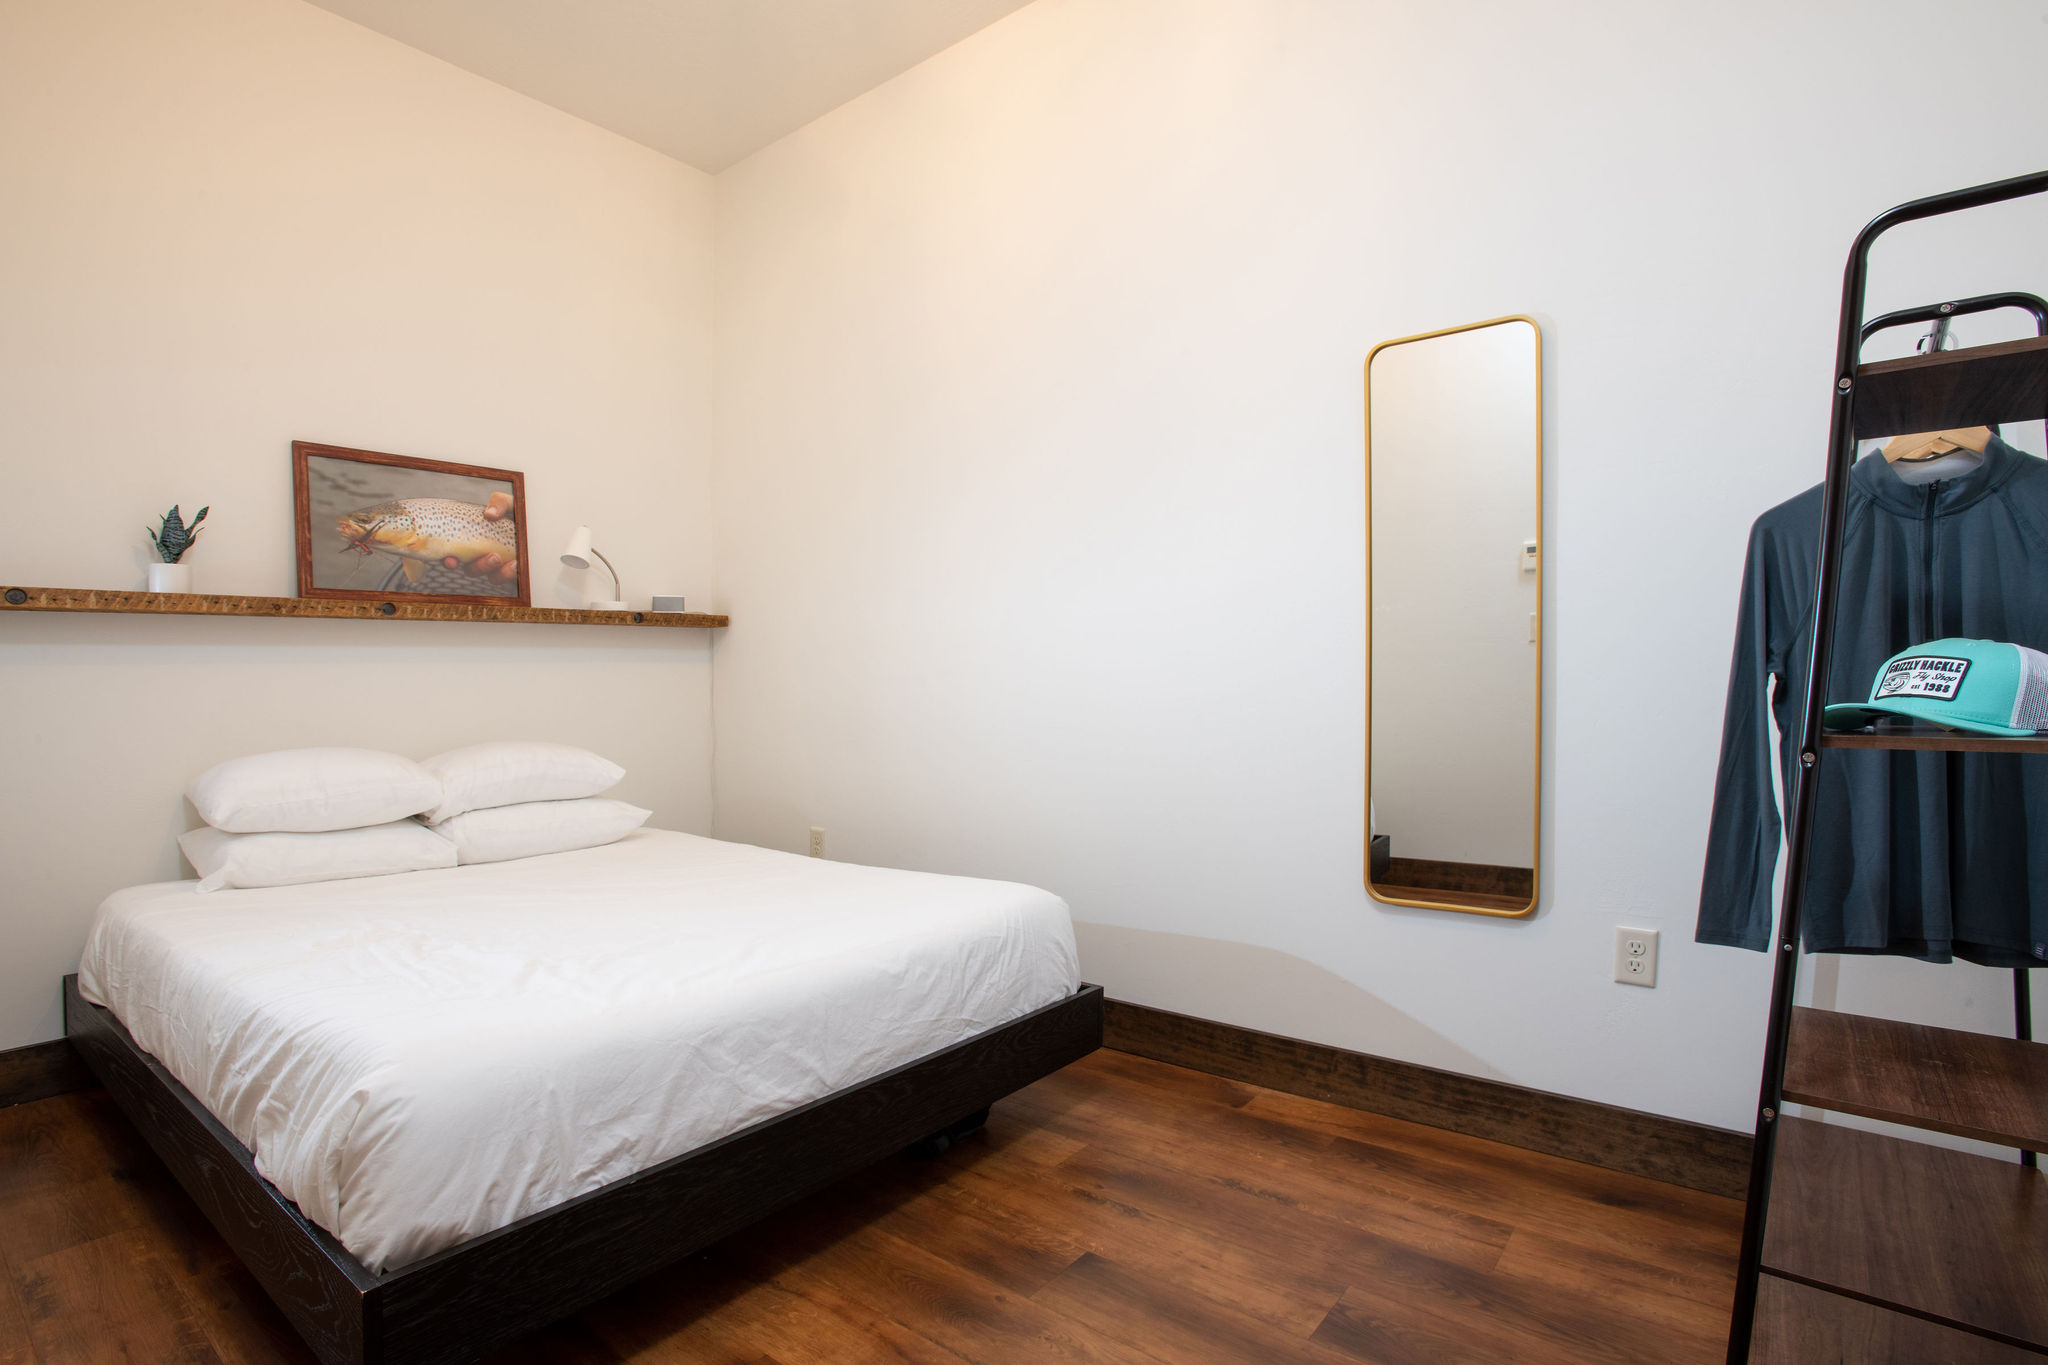 Accommodations In Downtown Missoula